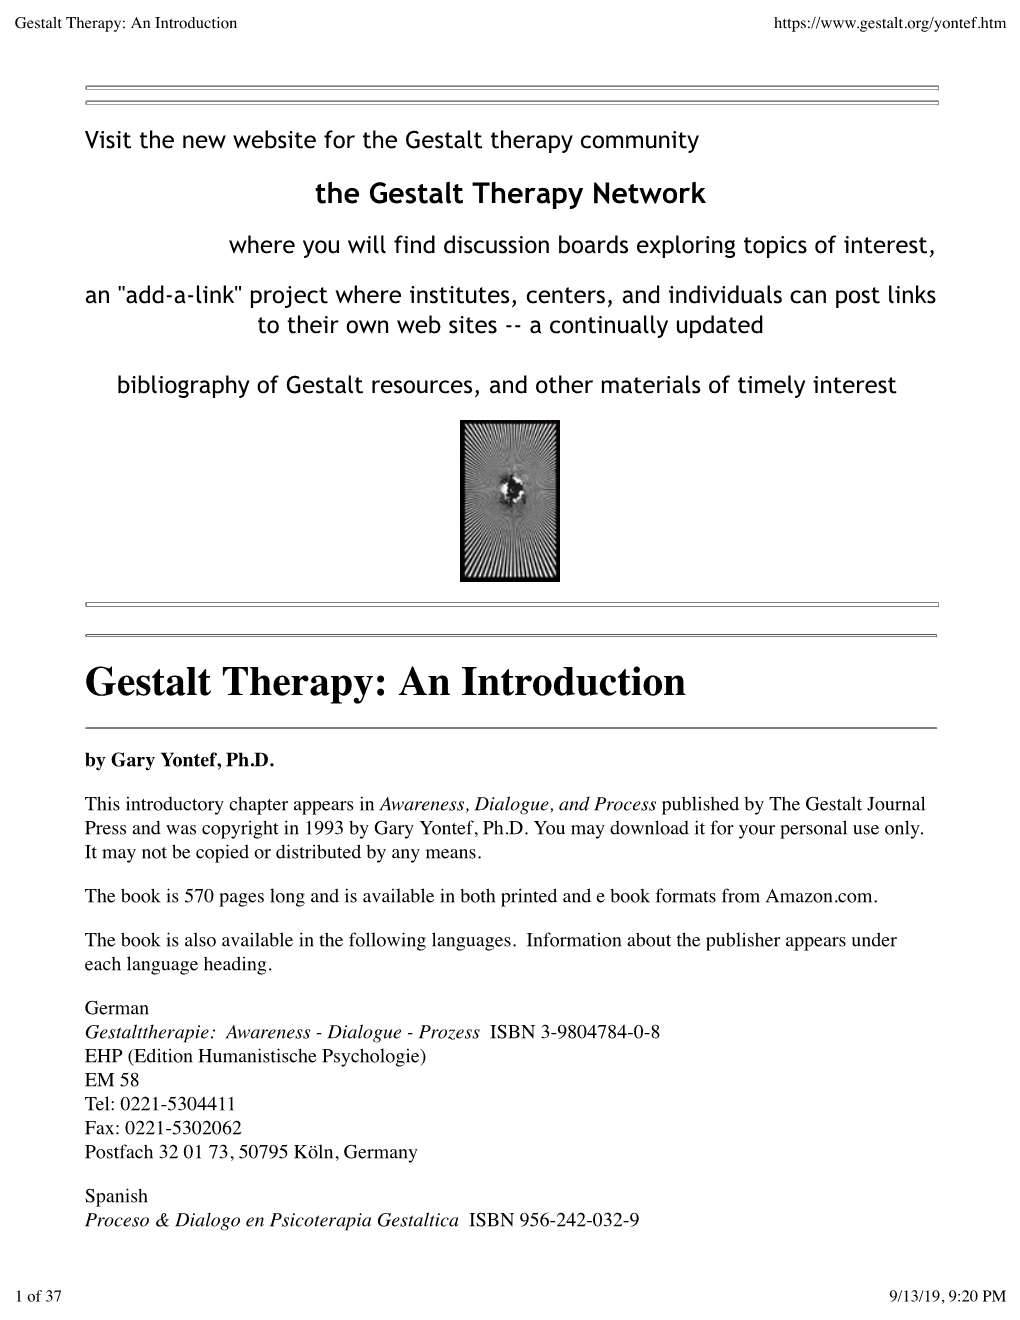 Gestalt Therapy: an Introduction